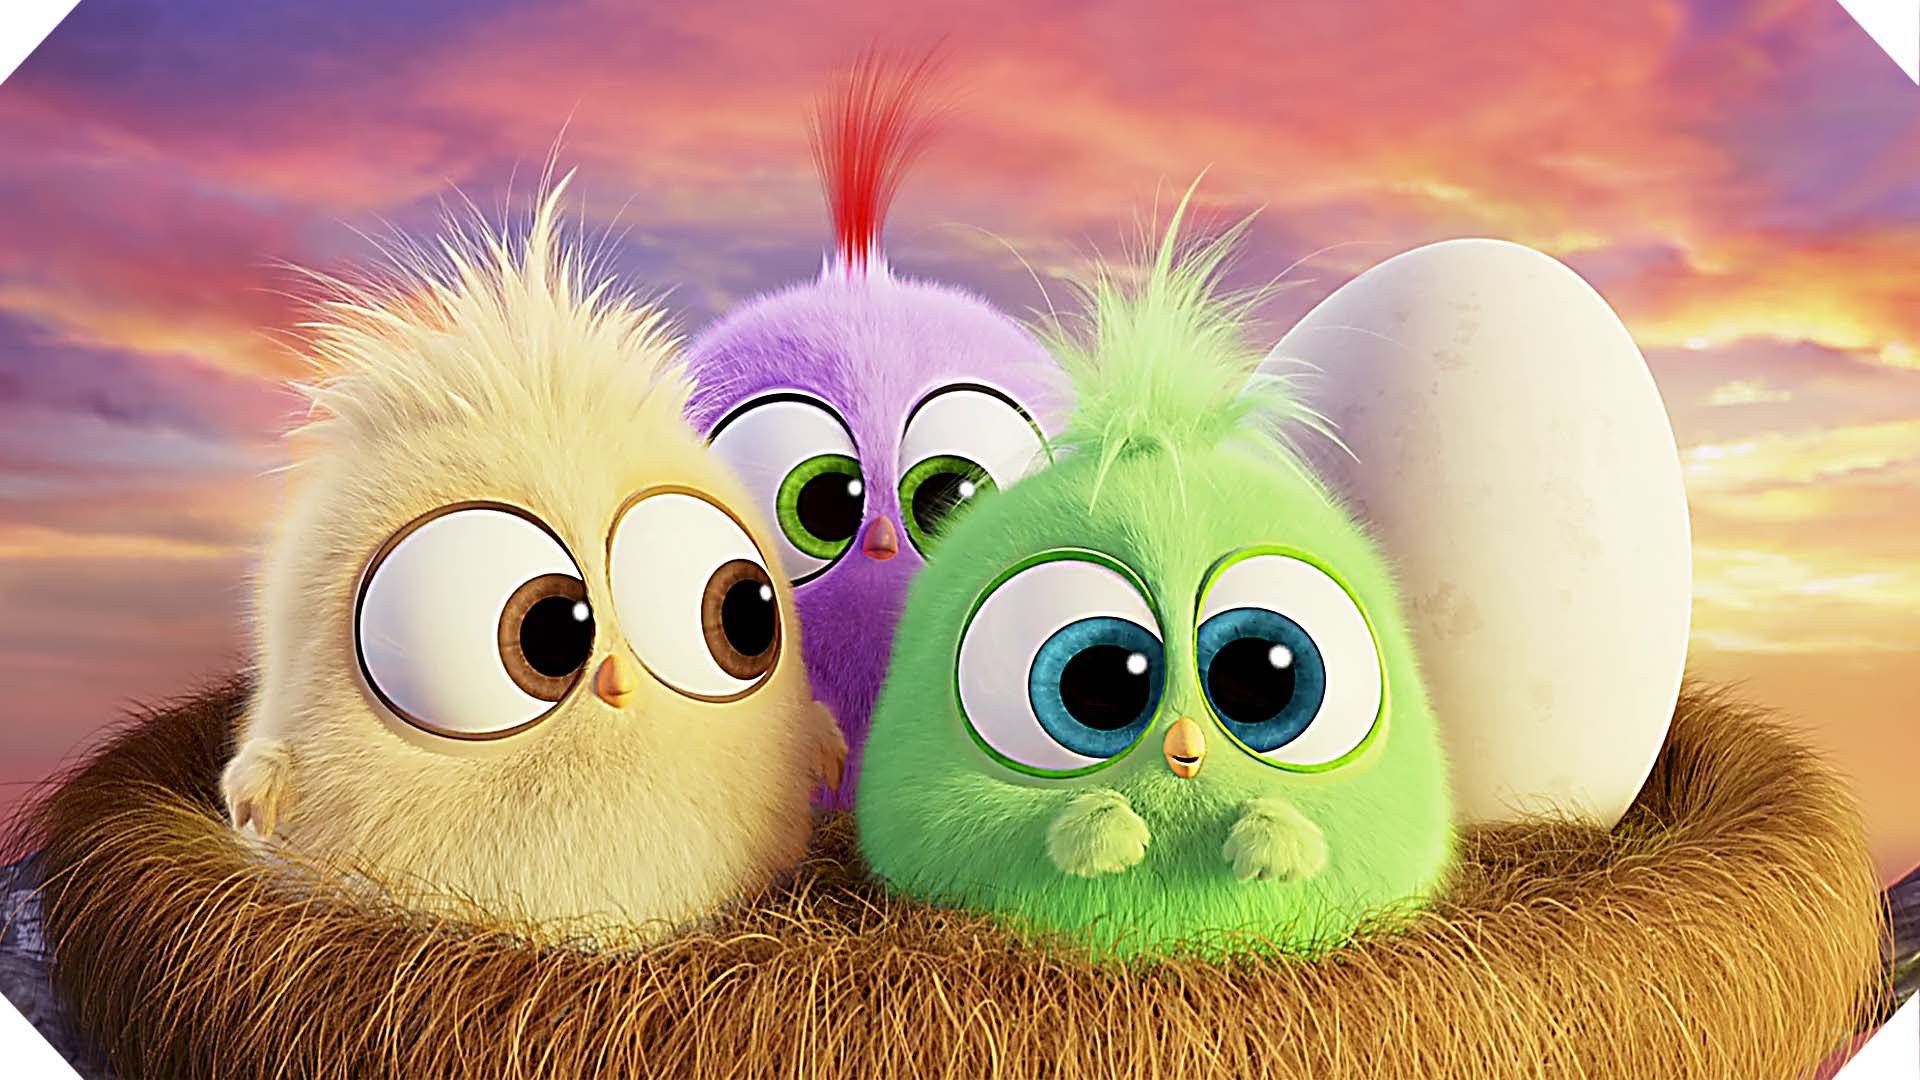 20+ Awesome HD Wallpaper, Pictures & Images of Angry Birds for Android